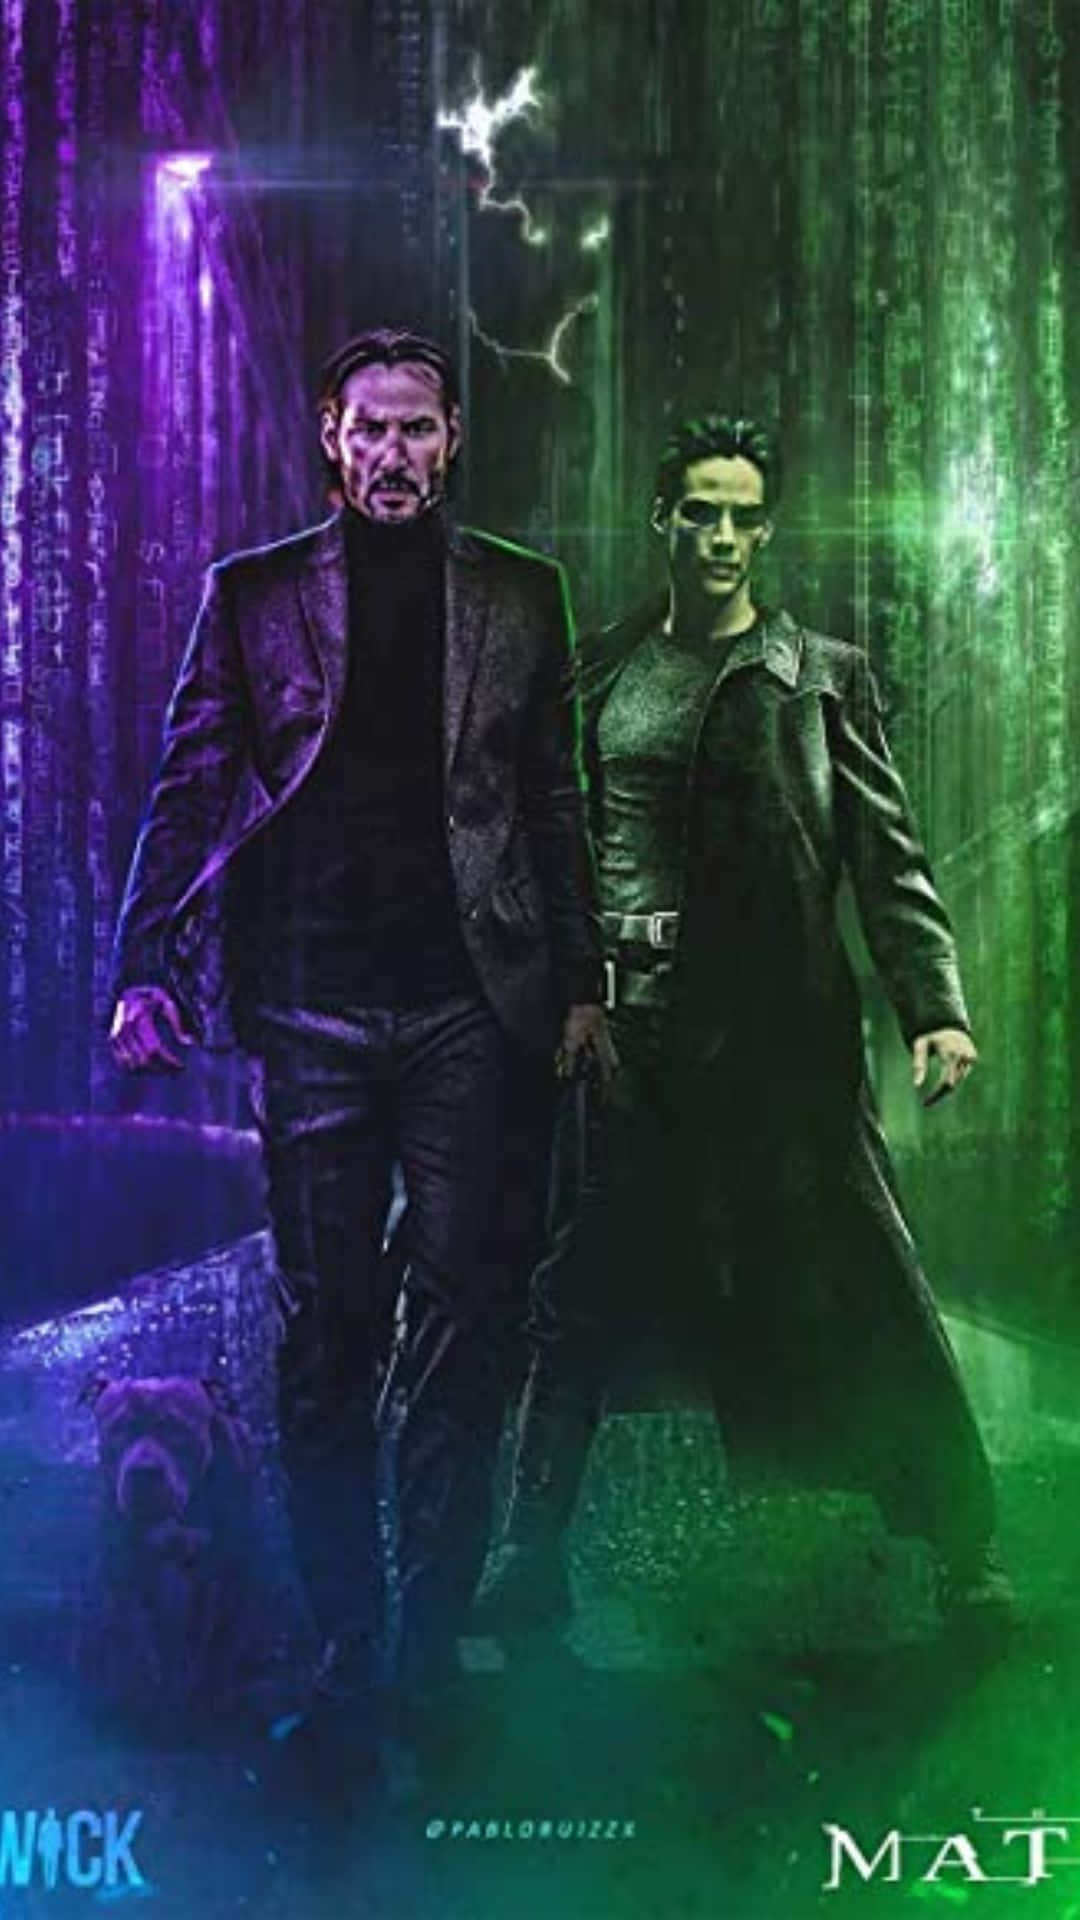 The Matrix Movie Poster With Two Men In Suits Wallpaper